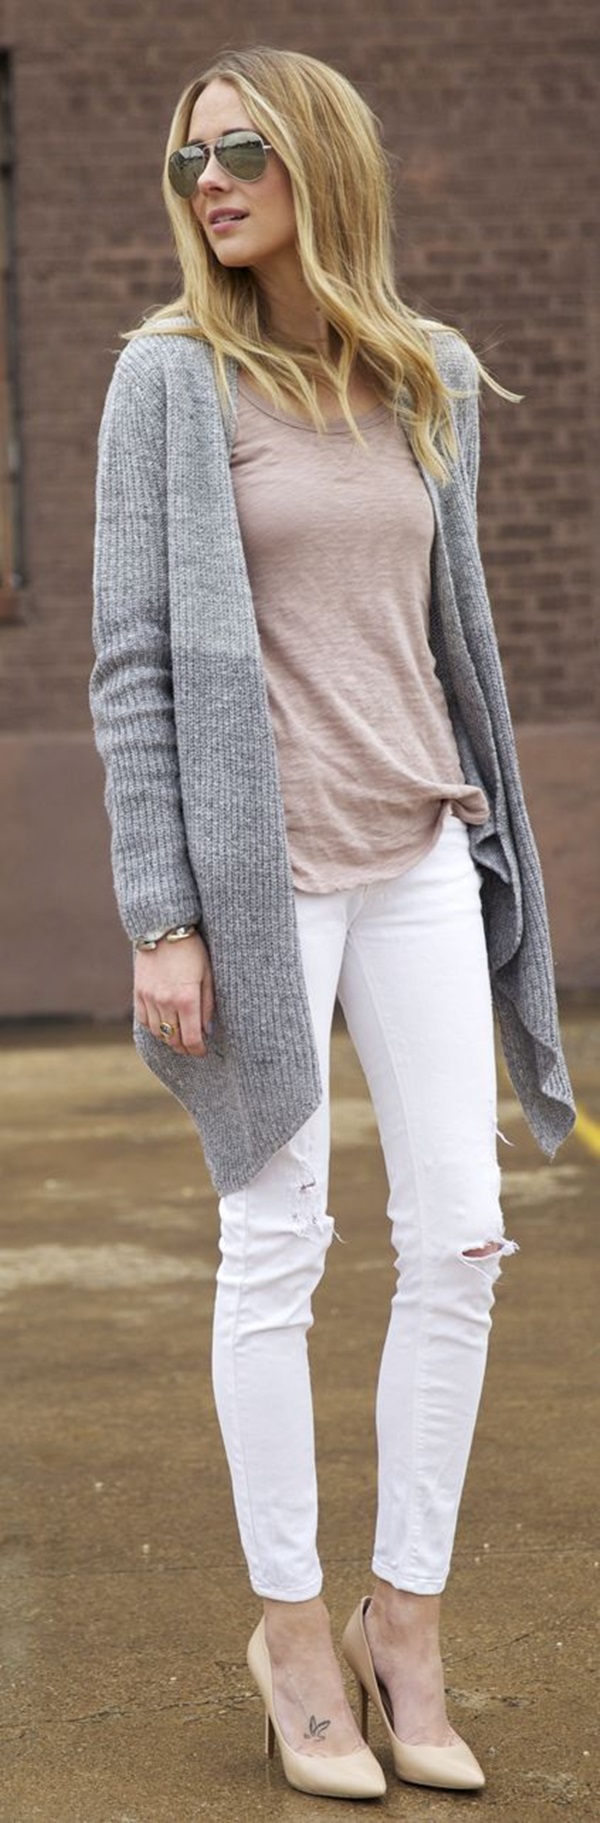 Stylish-Chic-Long-Cardigan-Outfits-For-Ladies